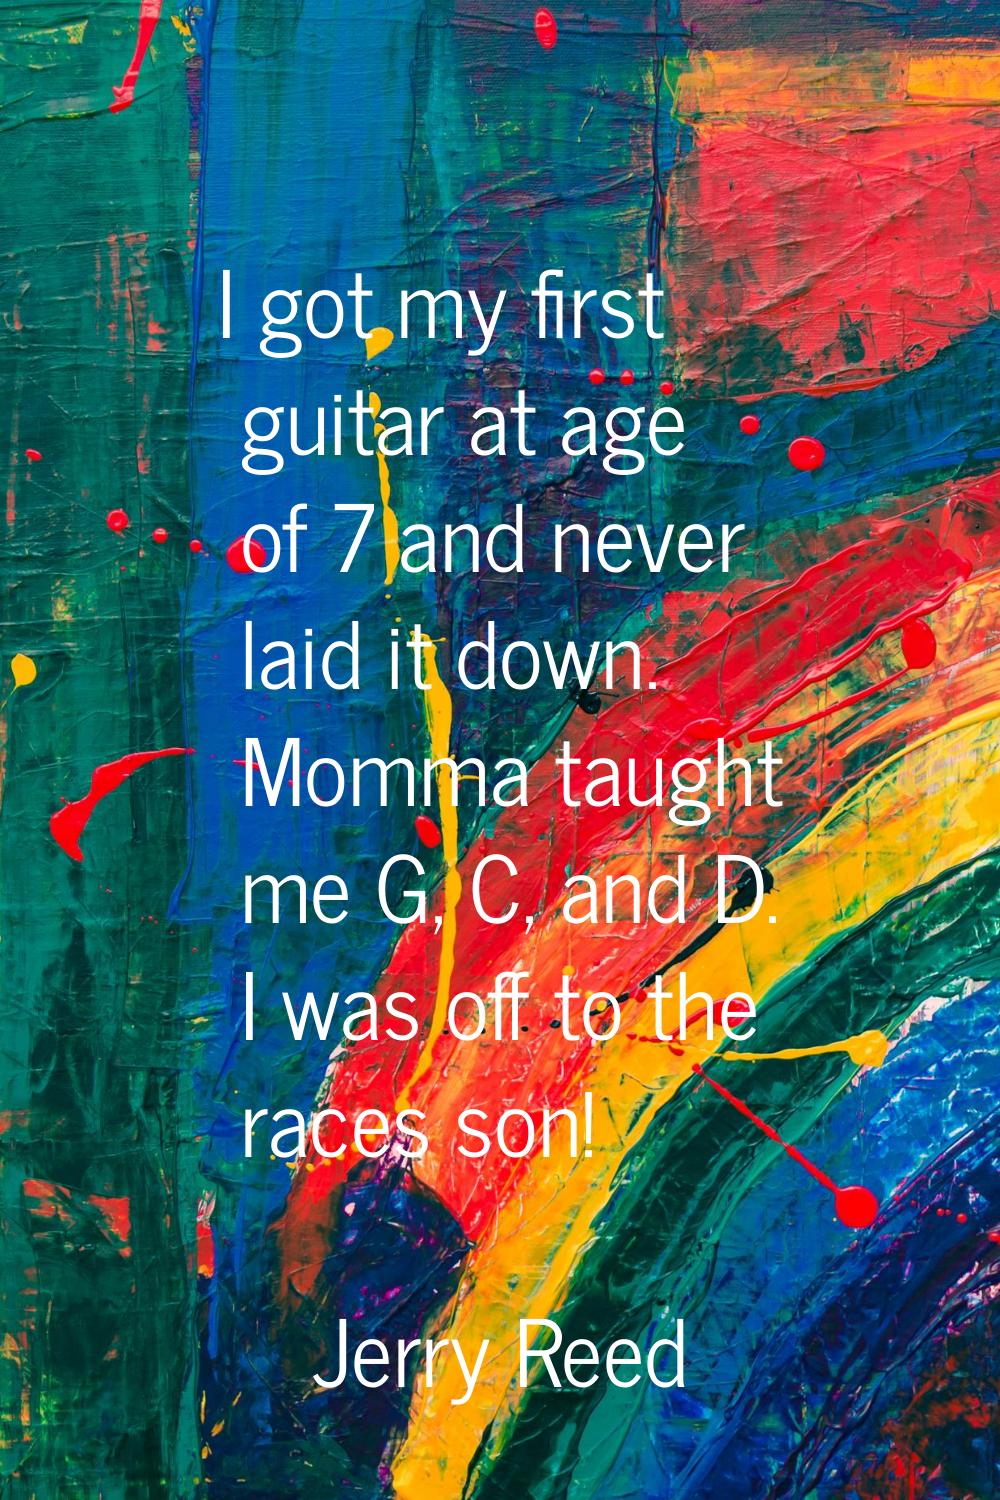 I got my first guitar at age of 7 and never laid it down. Momma taught me G, C, and D. I was off to